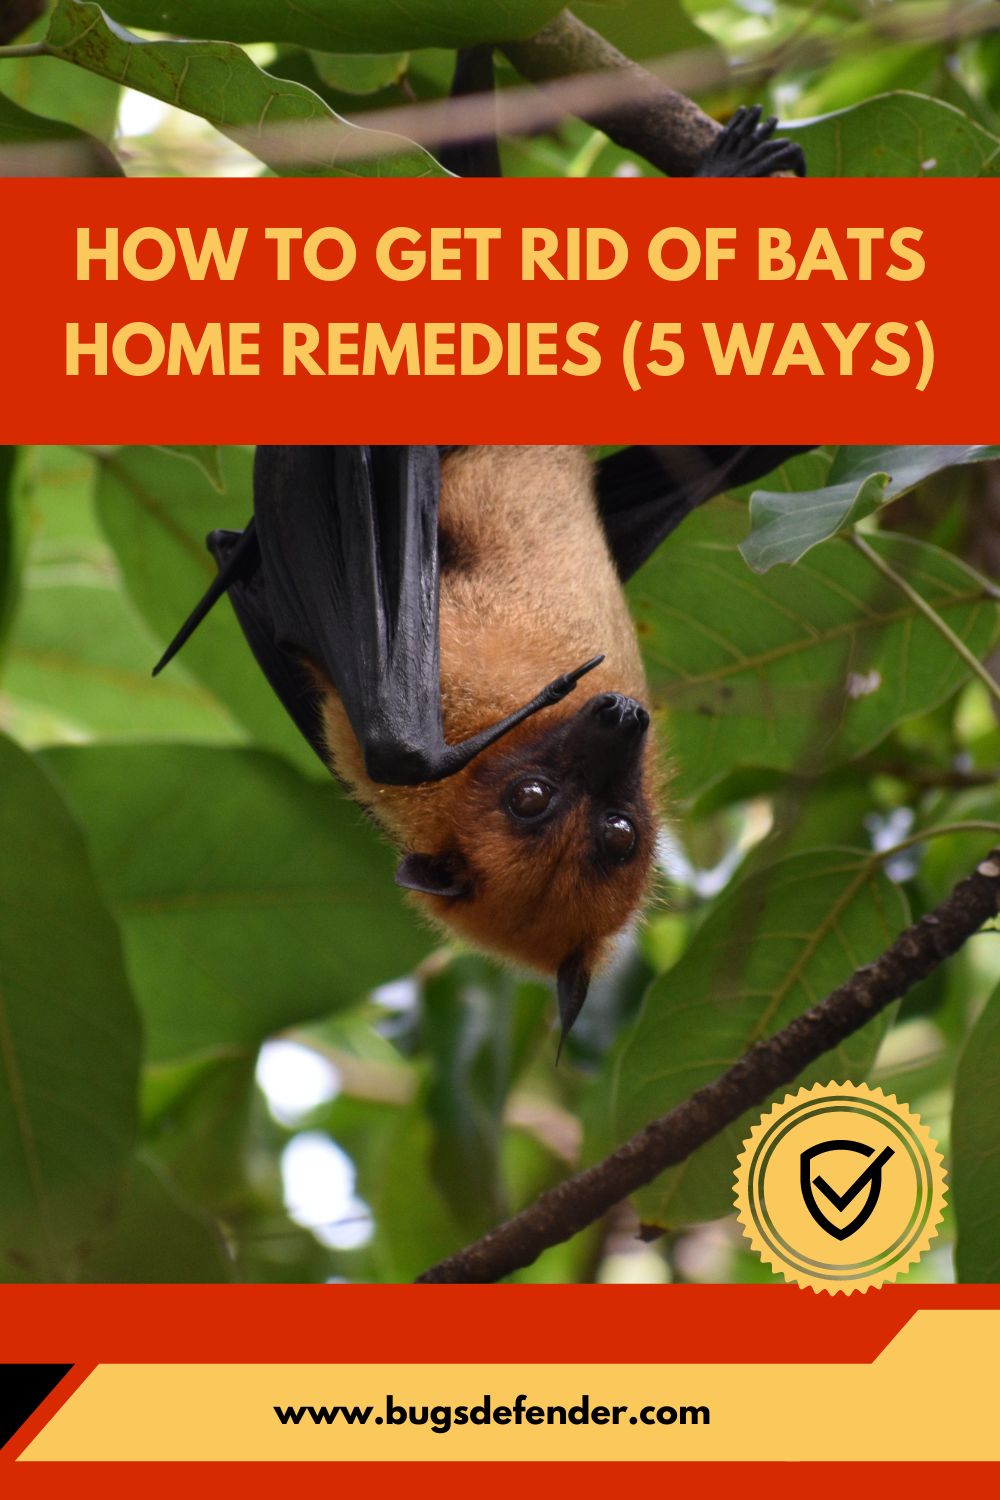 How To Get Rid Of Bats Home Remedies (5 Ways) pin2